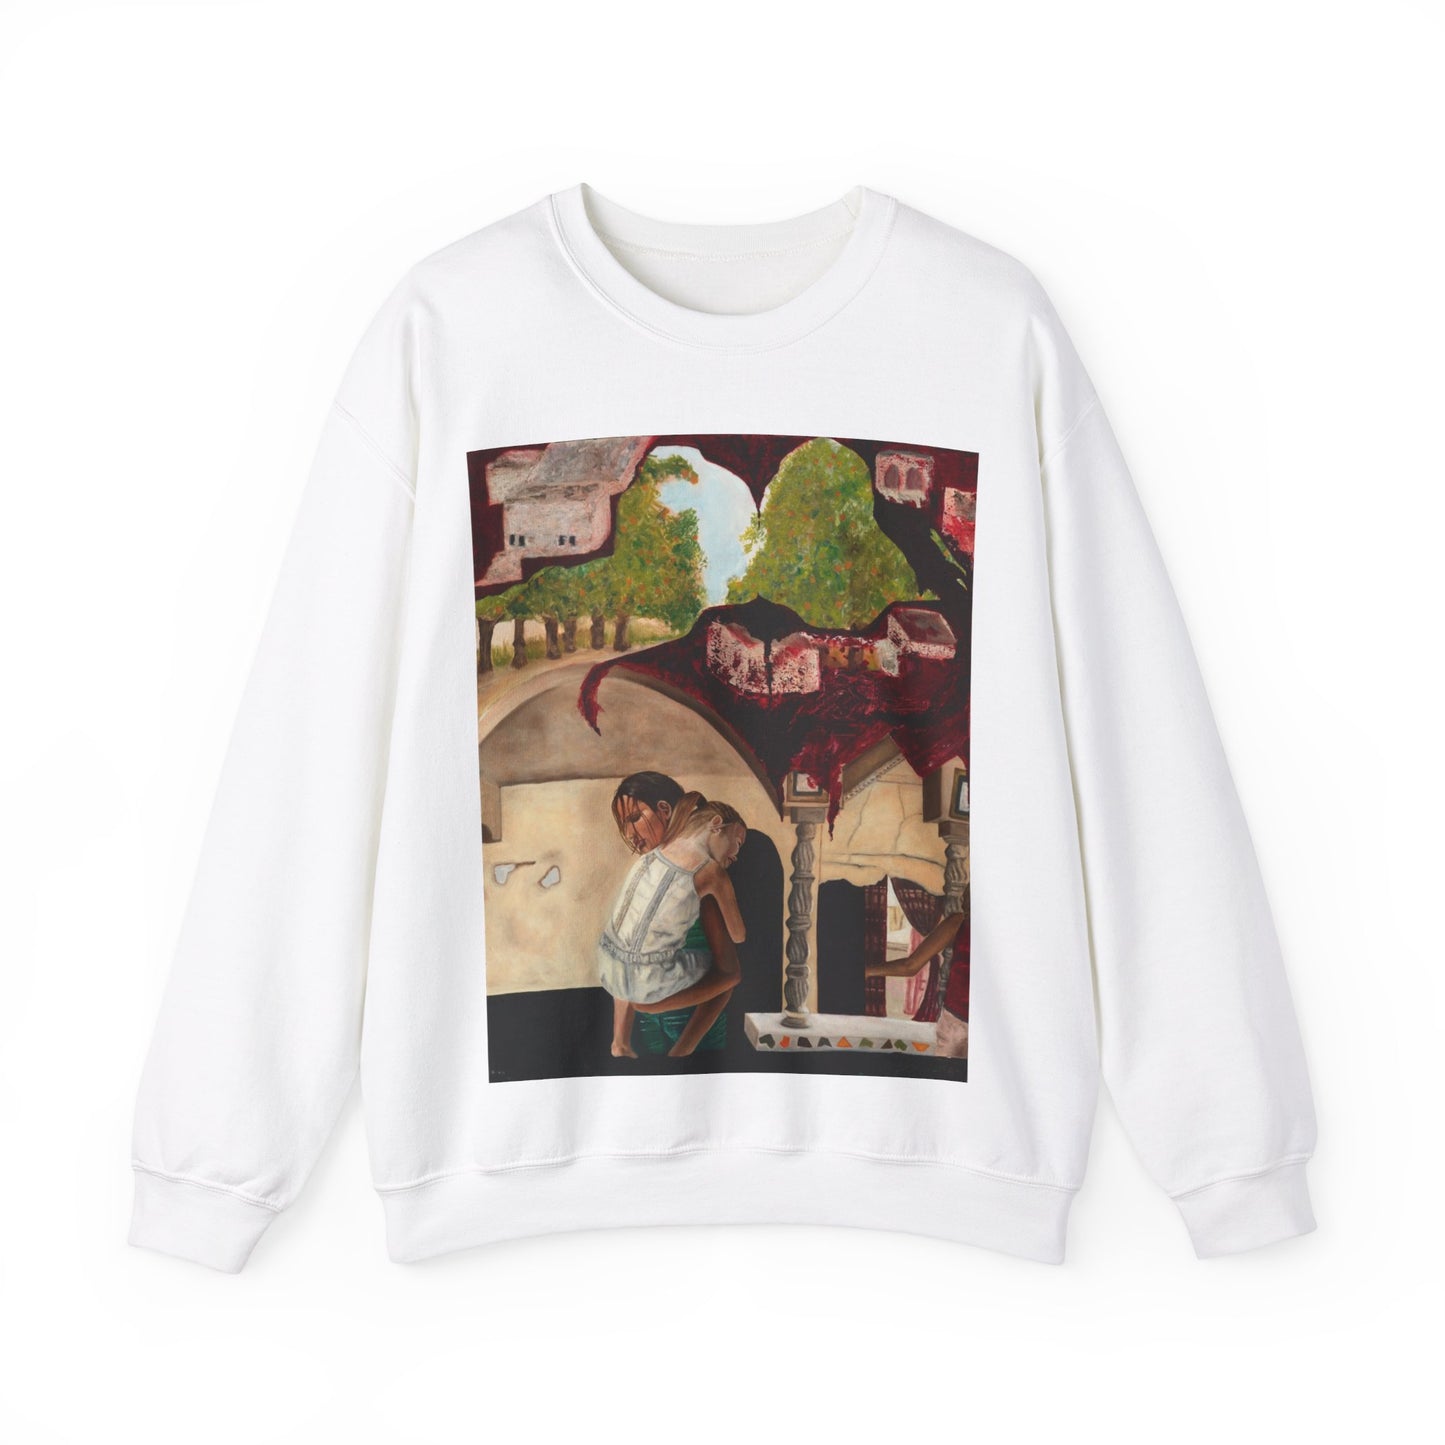 Crewneck Sweatshirt Printed with "Psyche of Lost Youth" - art under moonlight